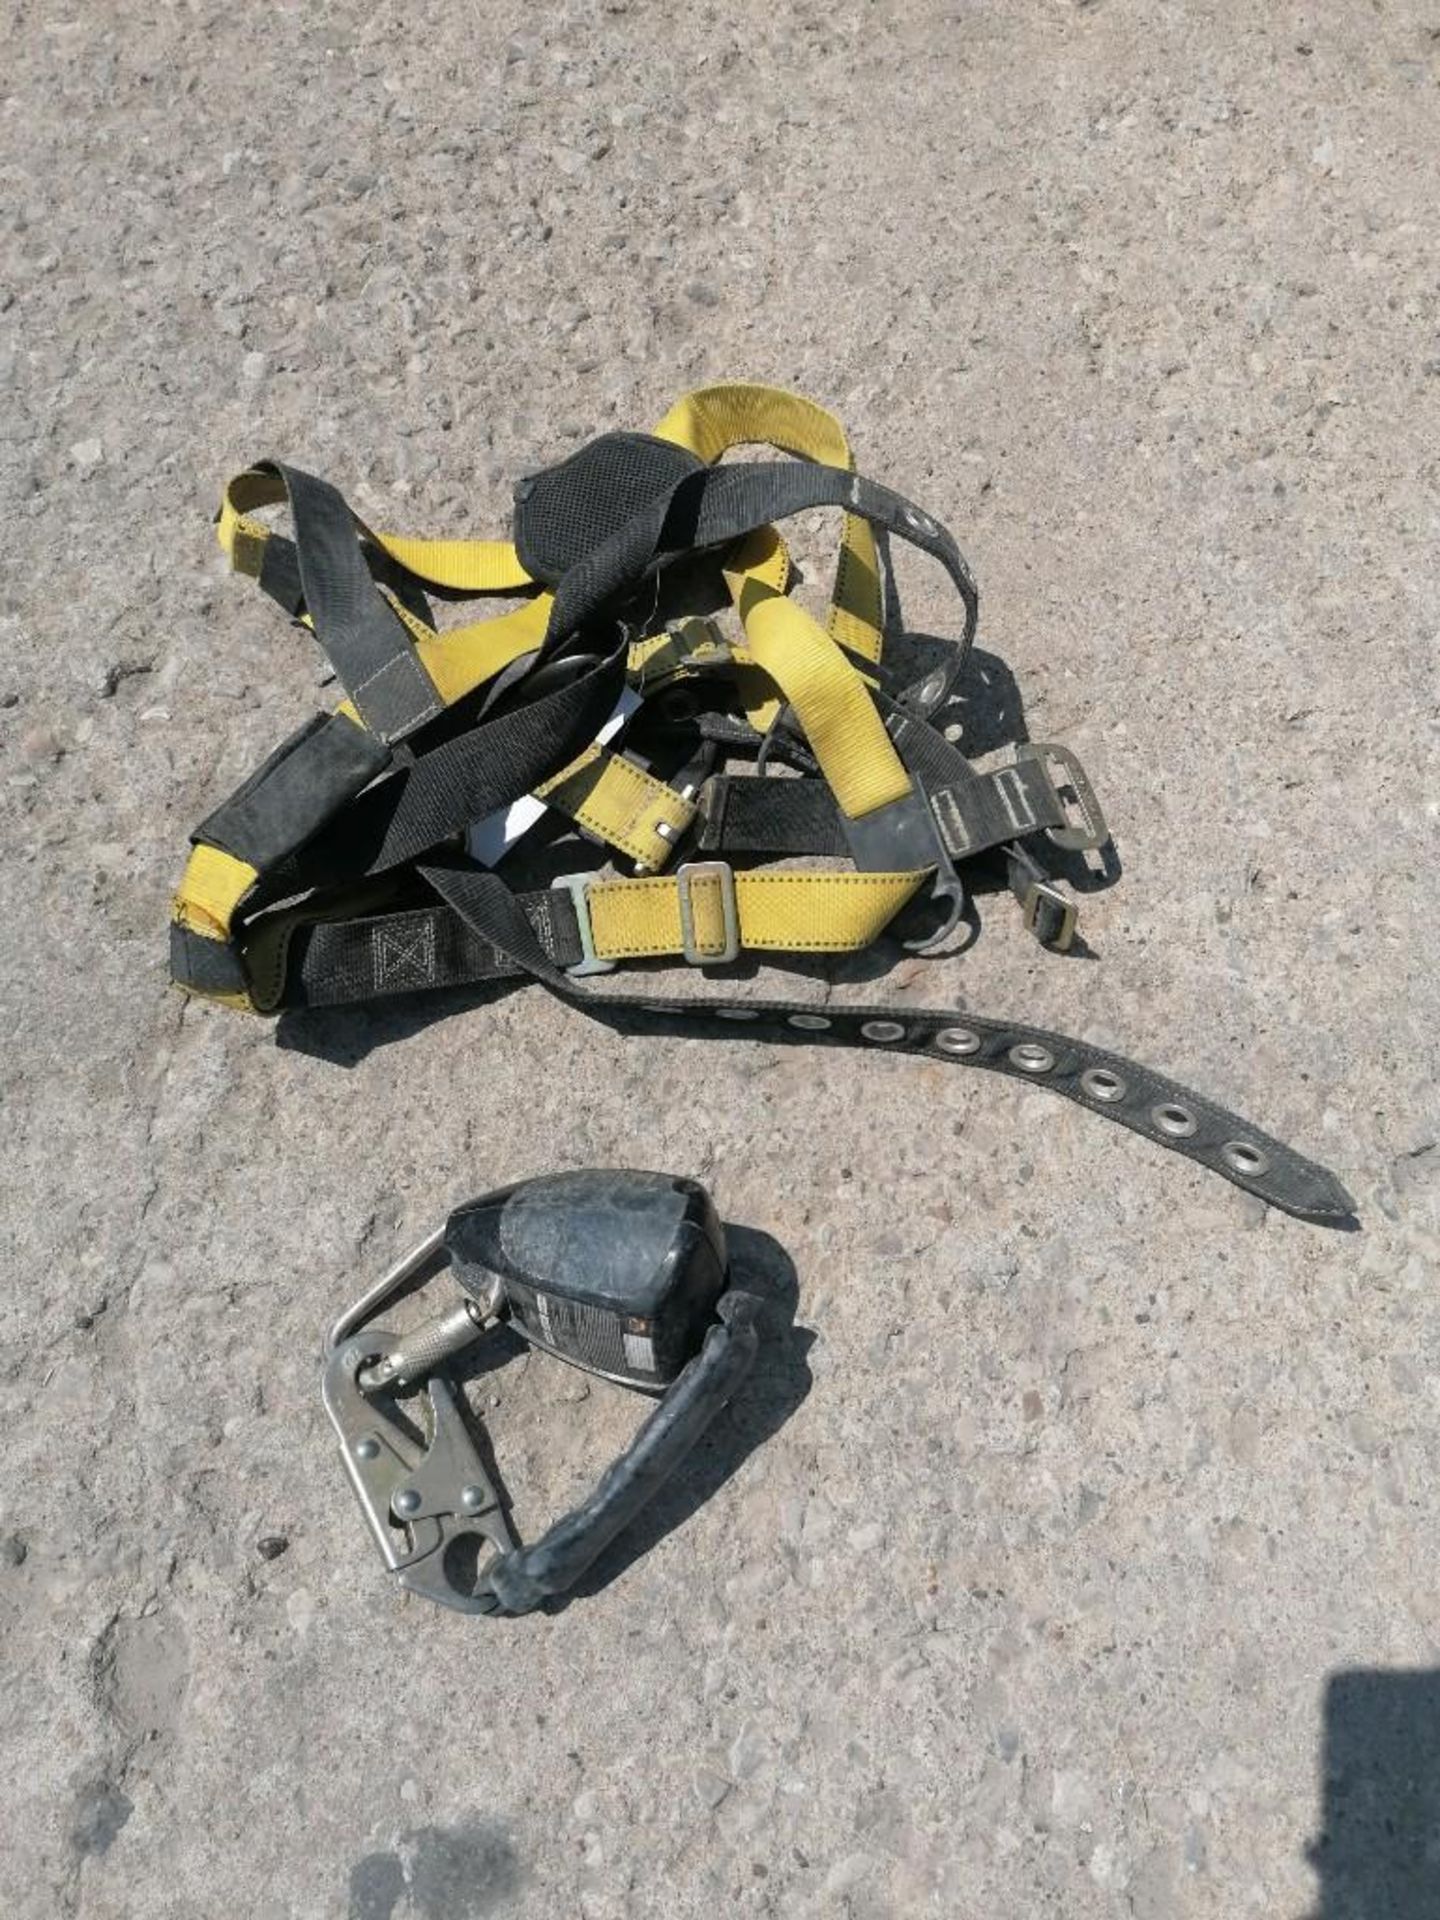 (2) Harnesses & (2) Self-Retracting Lifeline Cable. Located at 301 E Henry Street, Mt. Pleasant, - Image 2 of 3